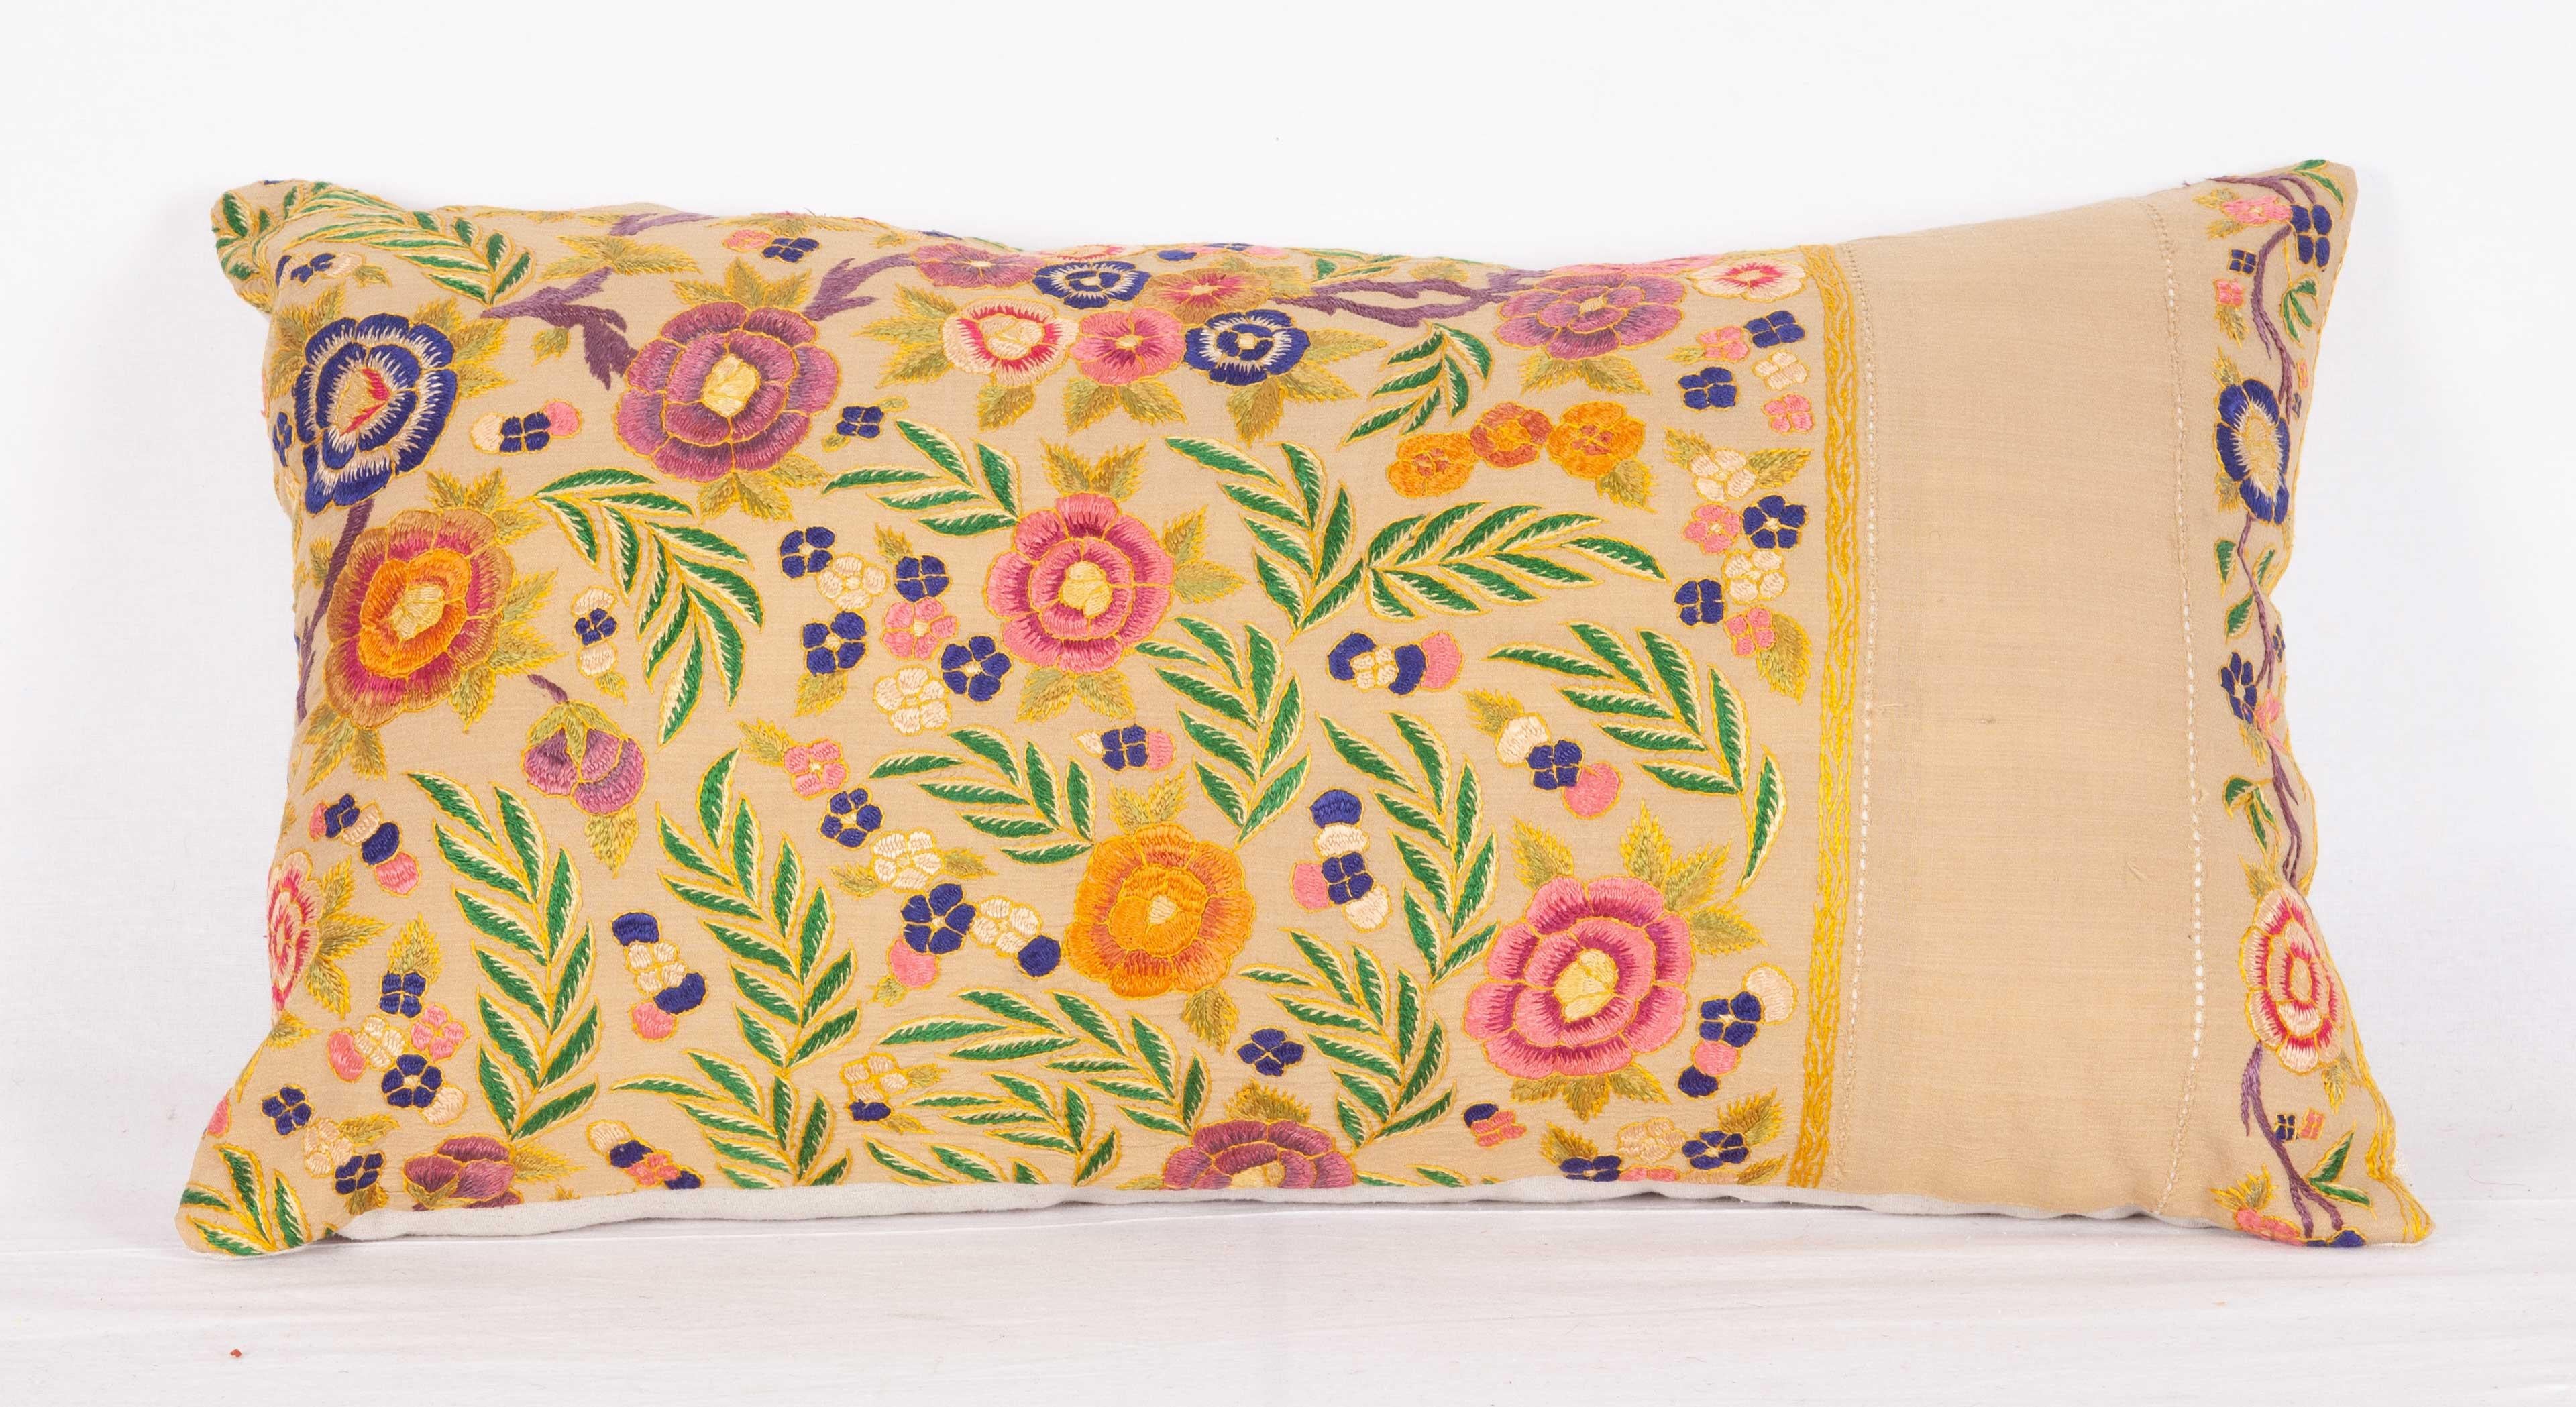 Embroidered Pillow Cases Fashioned from an Early 20th Century Embroidery